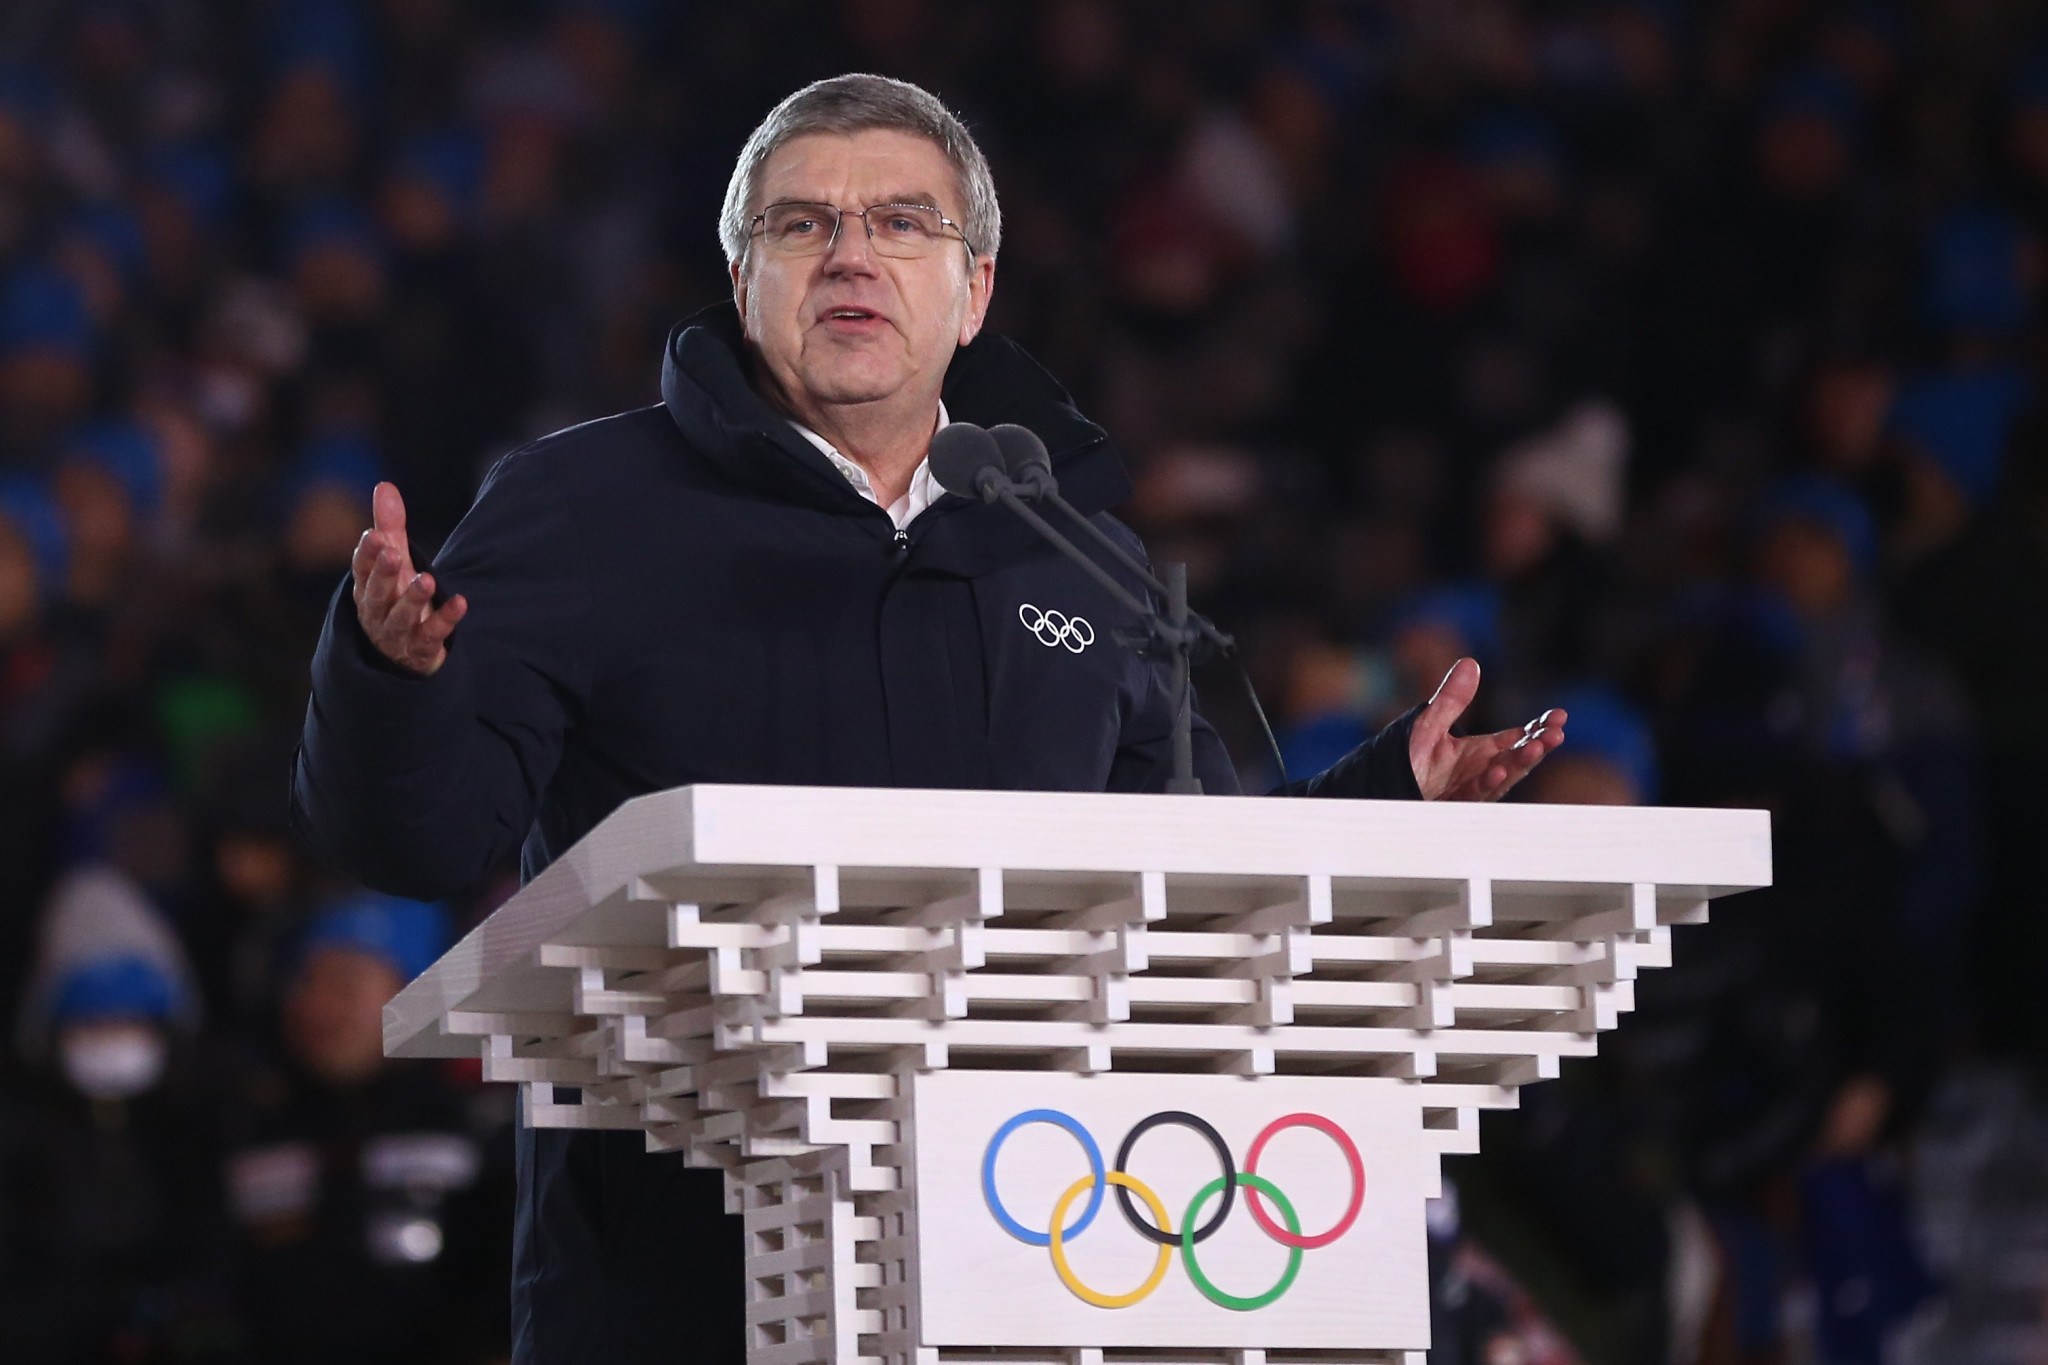 The decision of former DOSB President Thomas Bach, now leading the IOC, to lift Russia's suspension just days after the Closing Ceremony of Pyeongchang 2018 has been criticised in Germany ©Getty Images